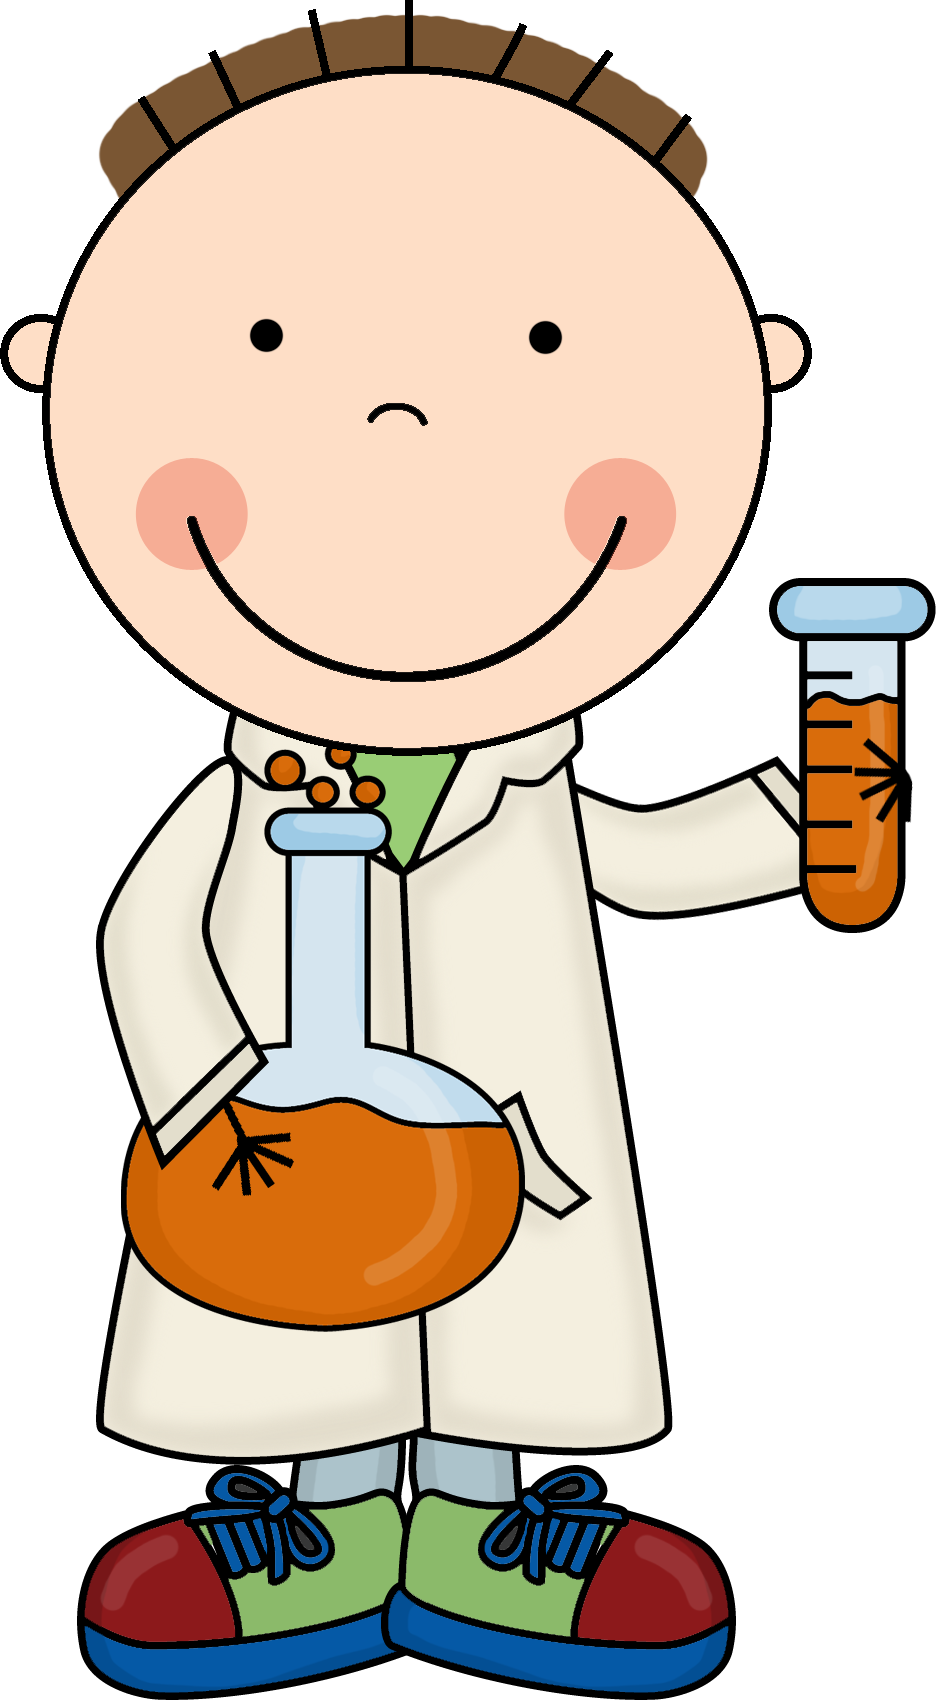 Index Of /images/scrappin Doodles/kids Science Fun - Scrappin Doodles Science (936x1700)